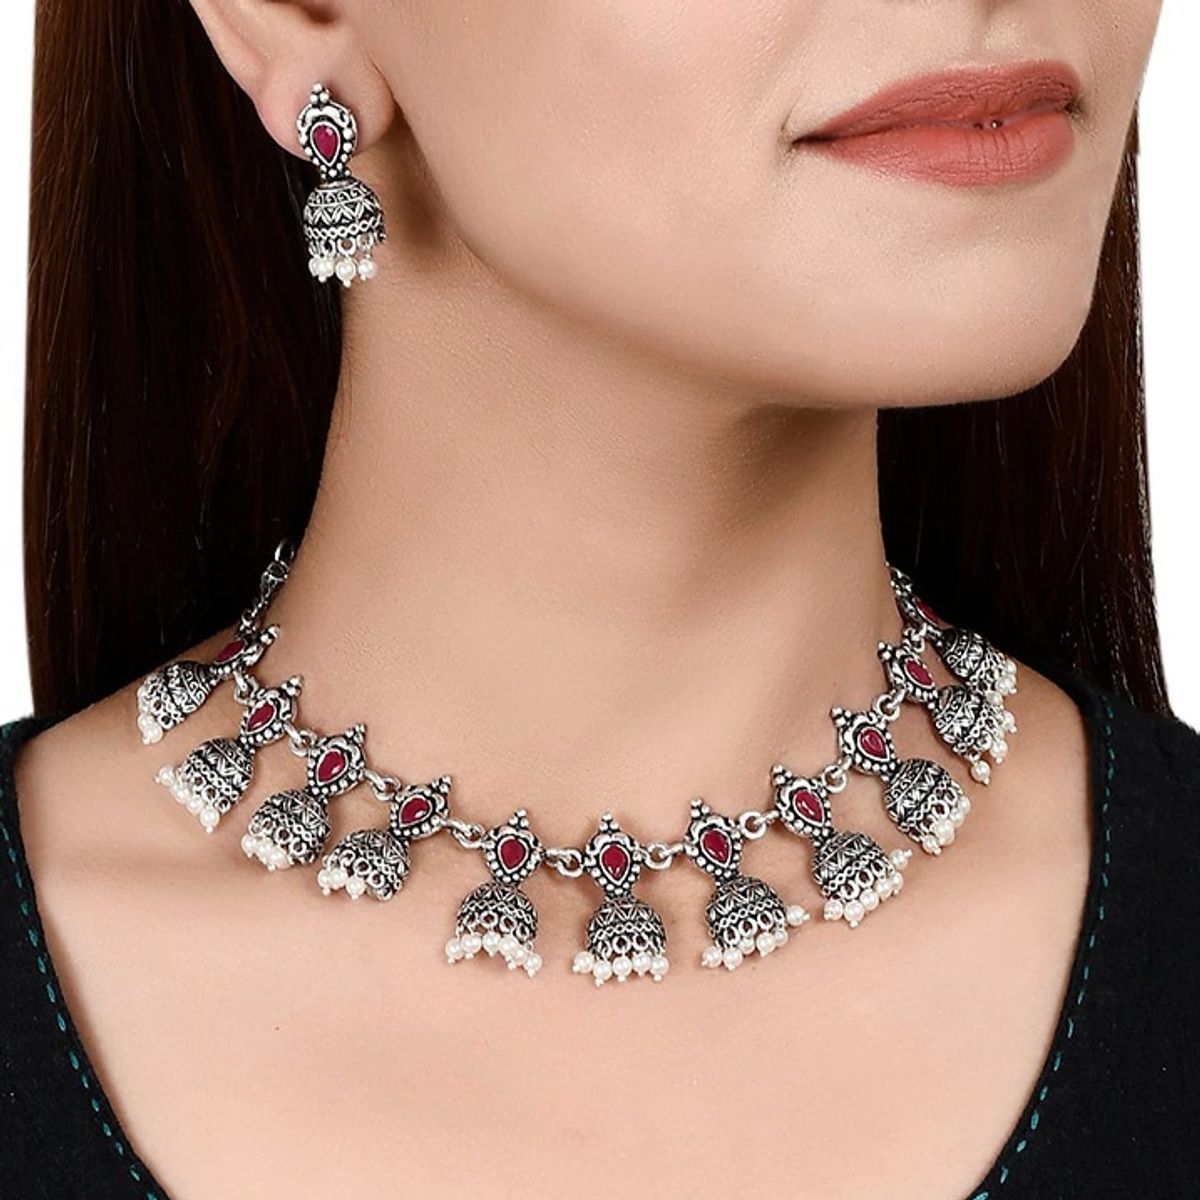 Fabula Oxidised German Silver With Maroon Stones & Pearls Ethnic Choker Necklace Set With Earrings